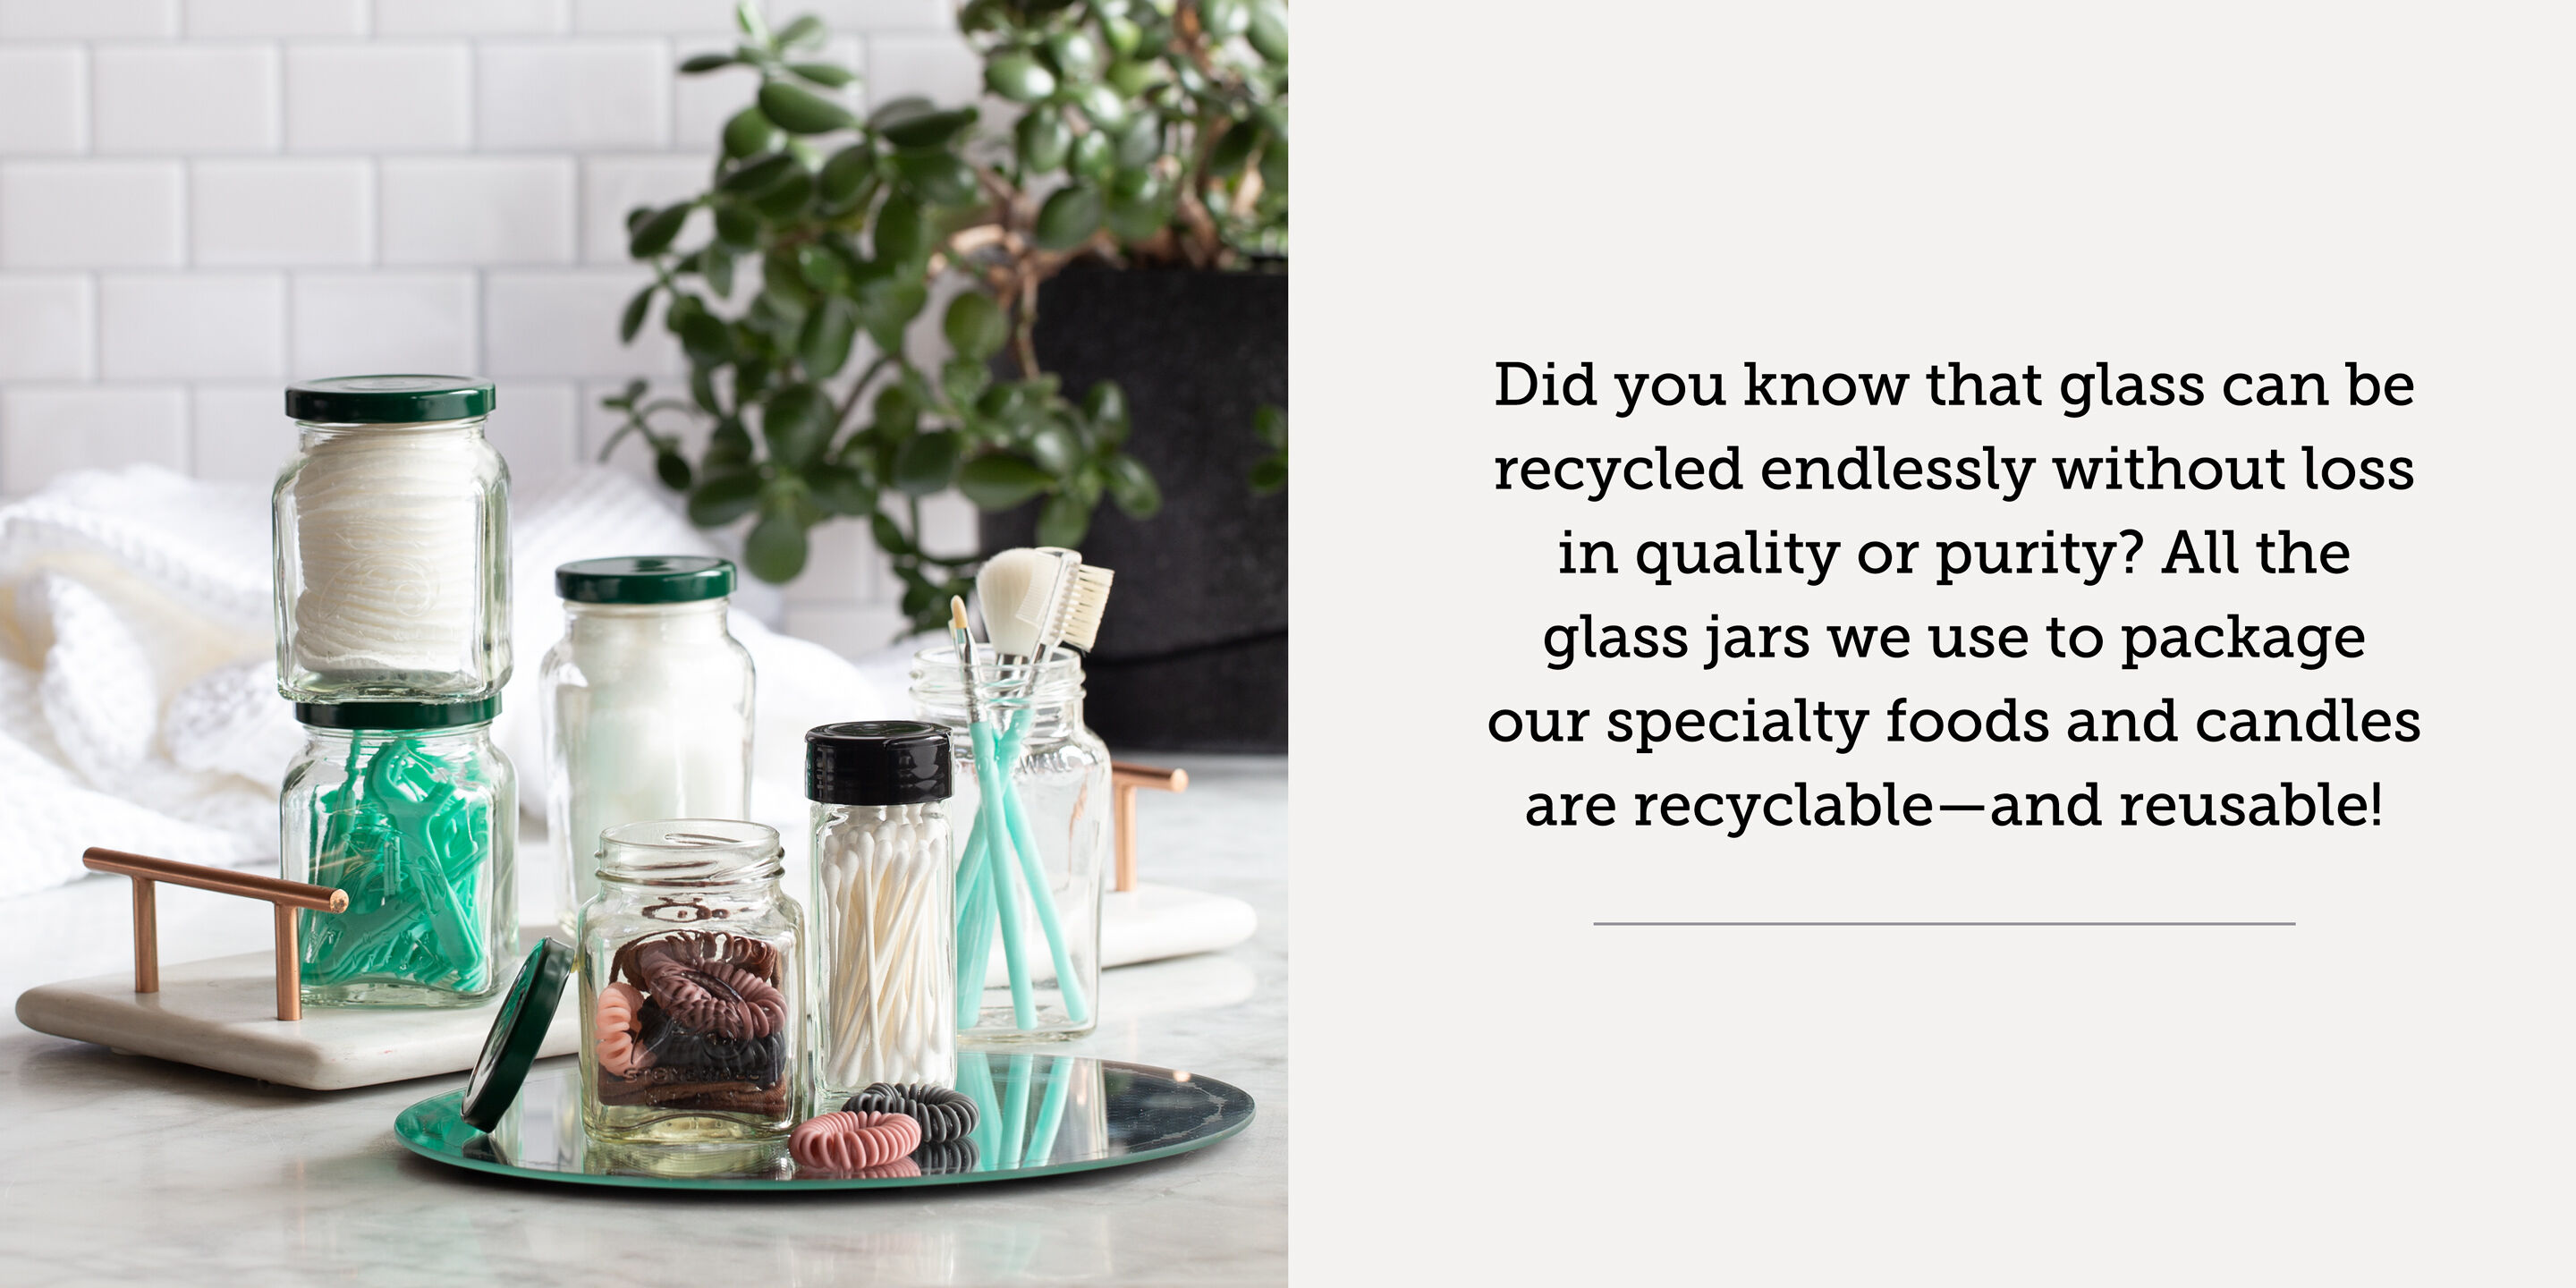 Recycled glass jars filled with toiletries | Did you know that glass can be recycled endlessly without loss in quality or purity? All the glass jars we use to package our specialty foods and candles are recyclable - and reusable!